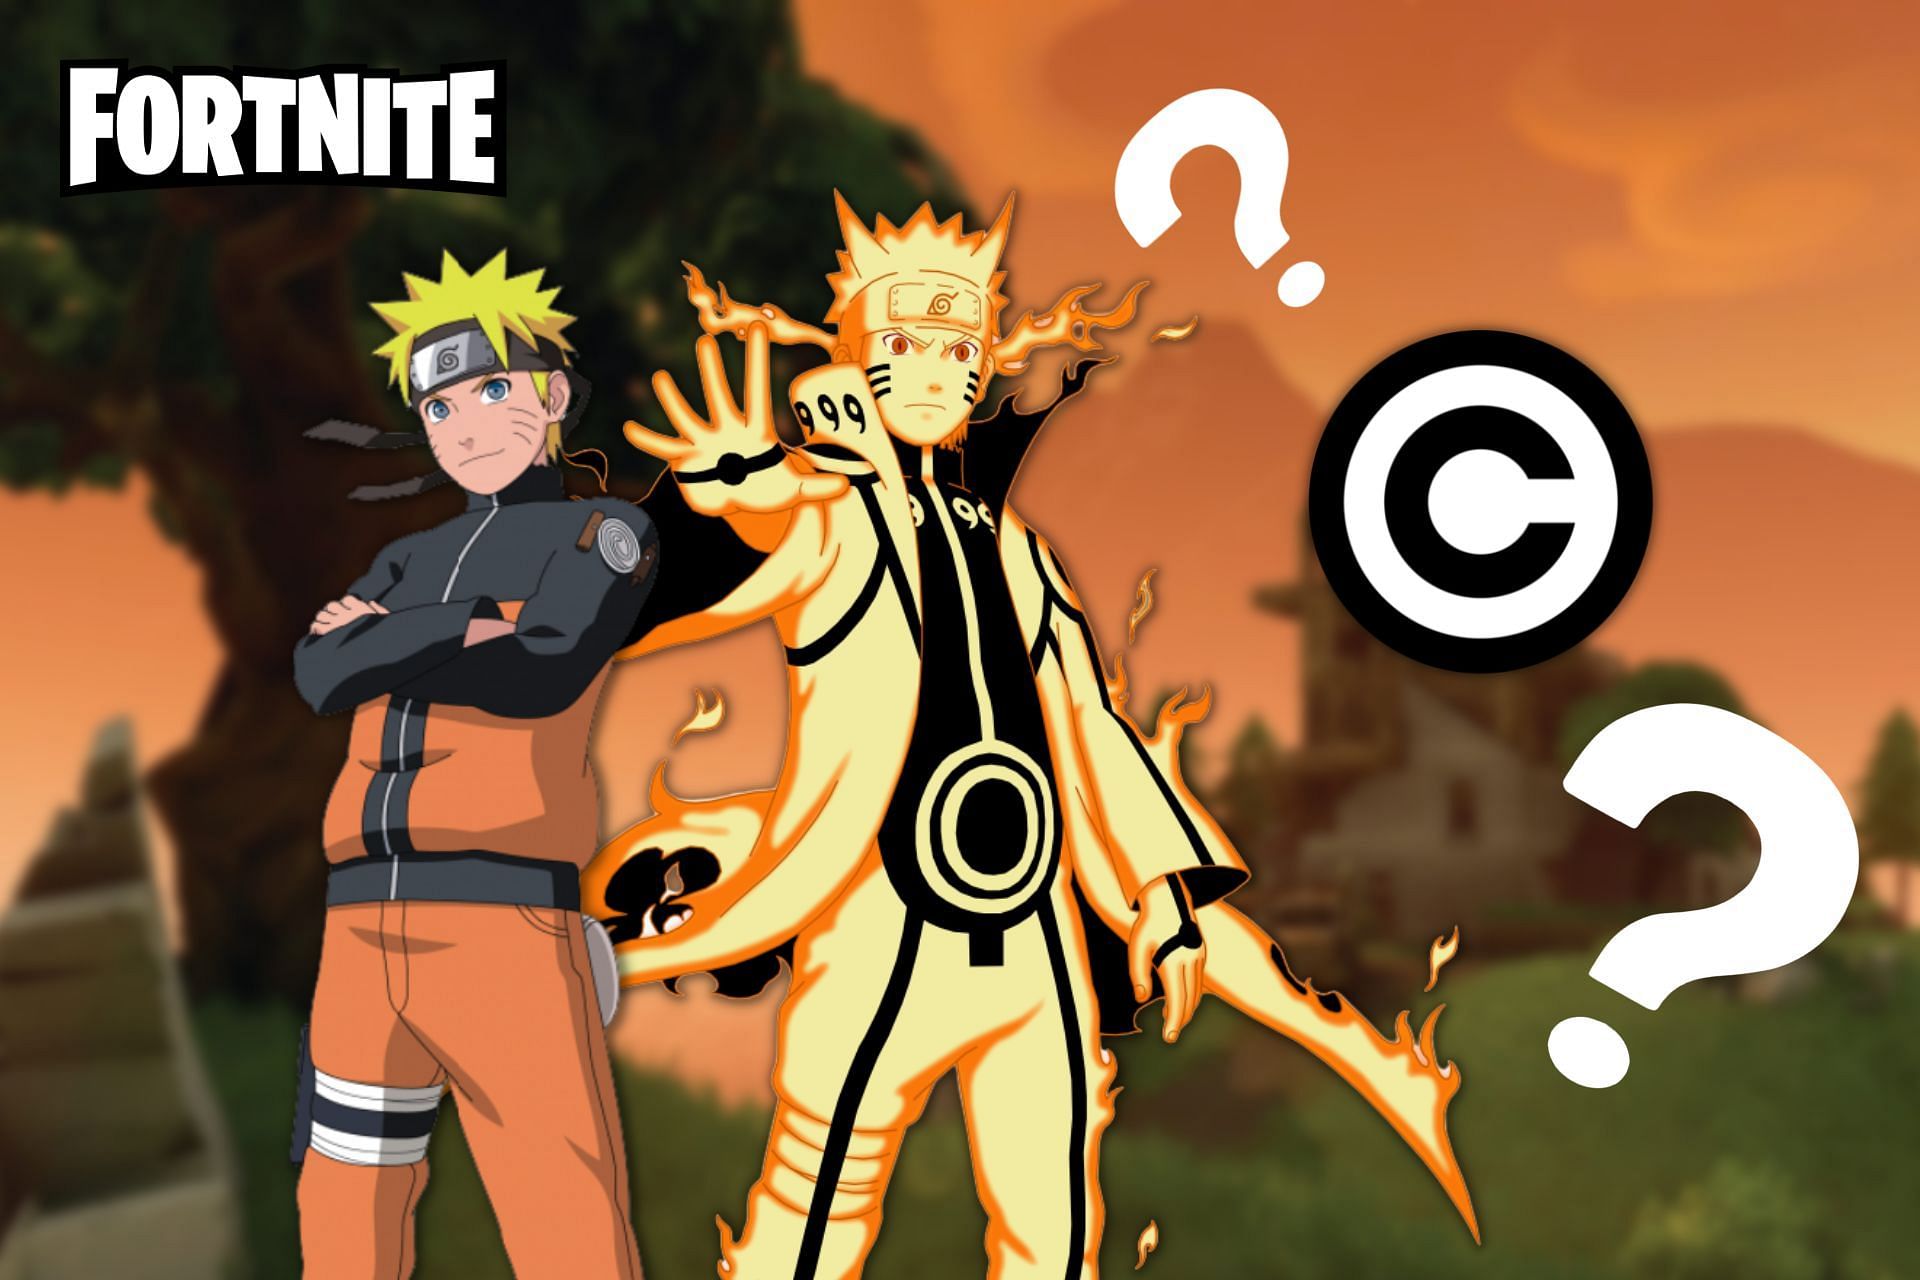 Fortnite might have a problem with copyrights for Naruto (Image via Sportskeeda)